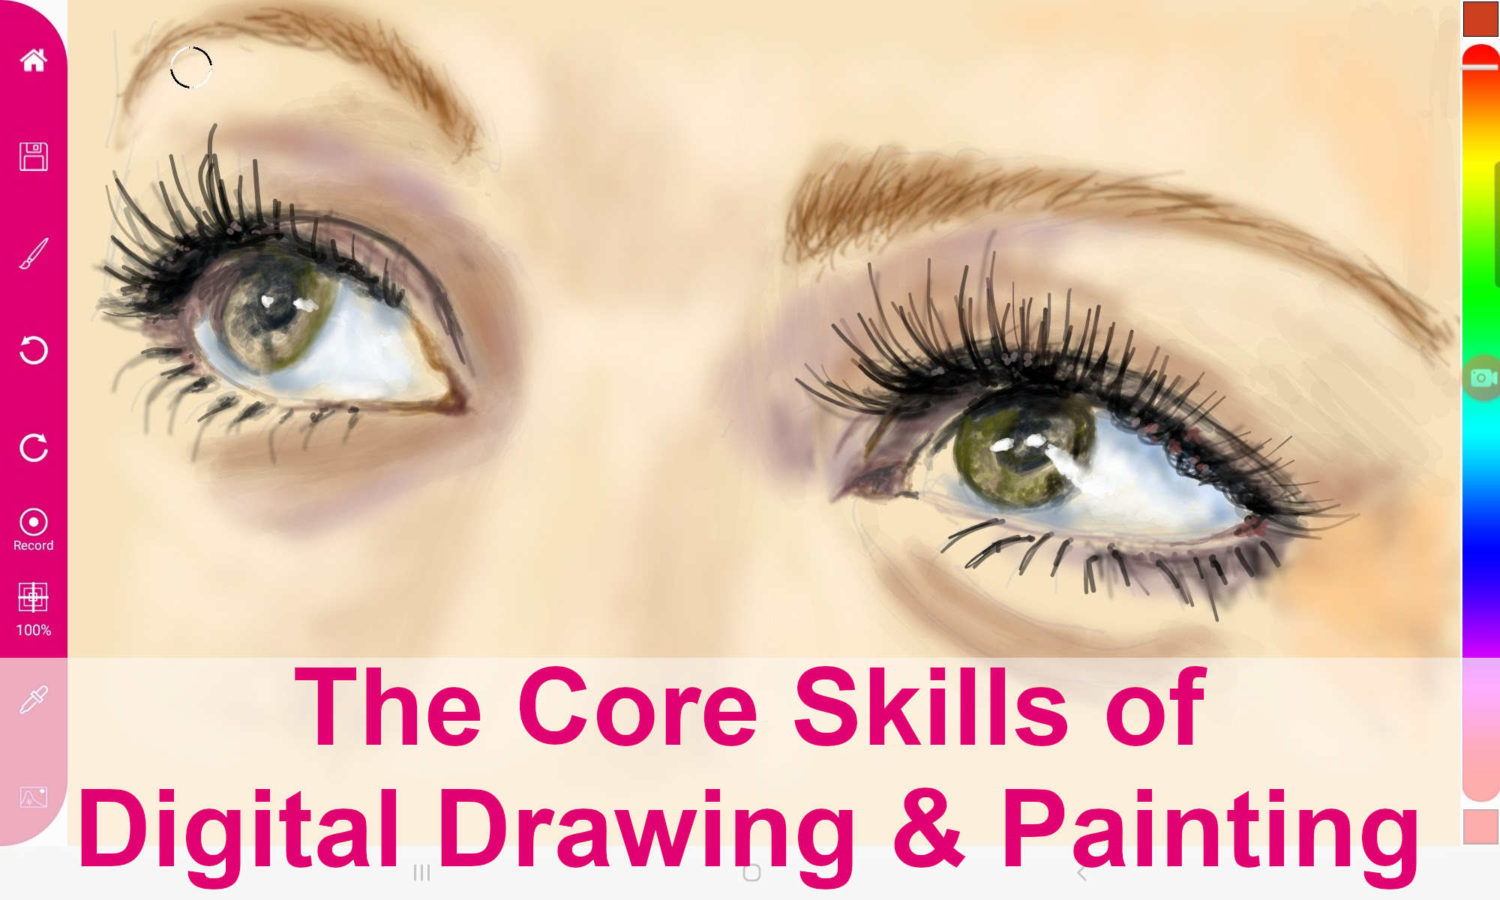 featured - core skills